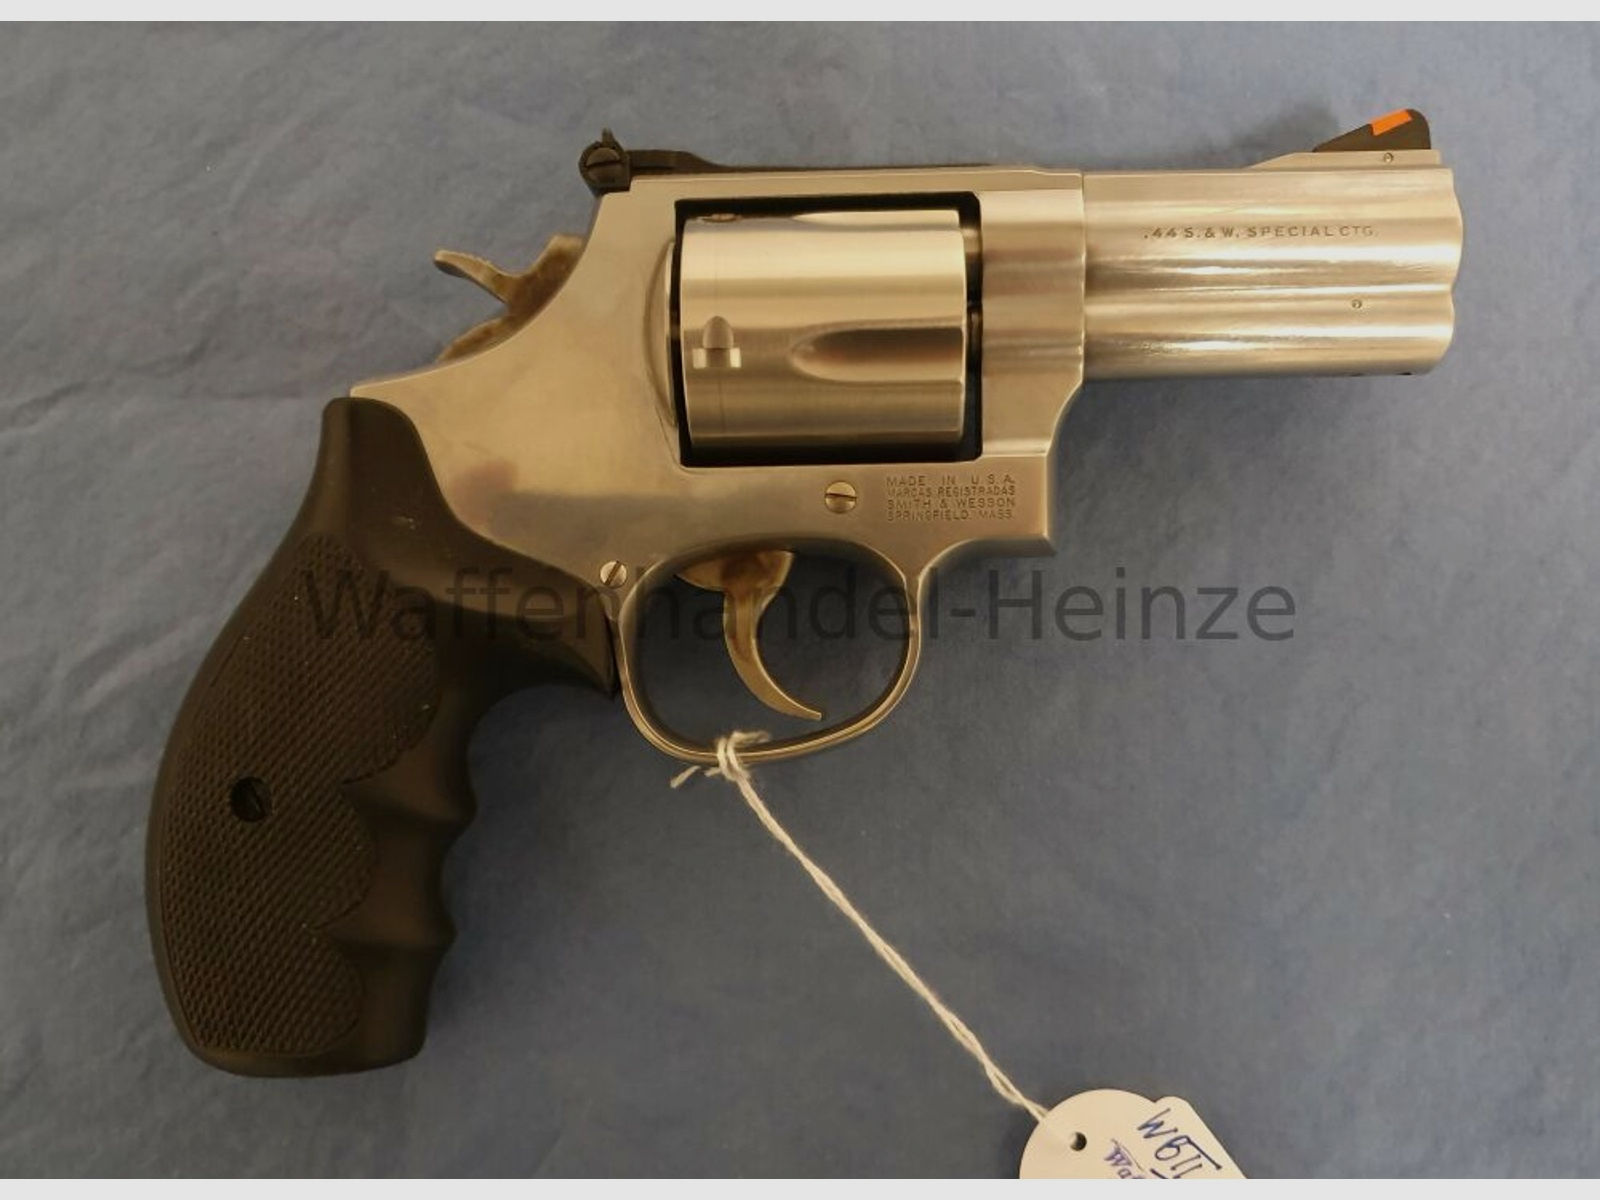 Smith & Wesson	 696-1